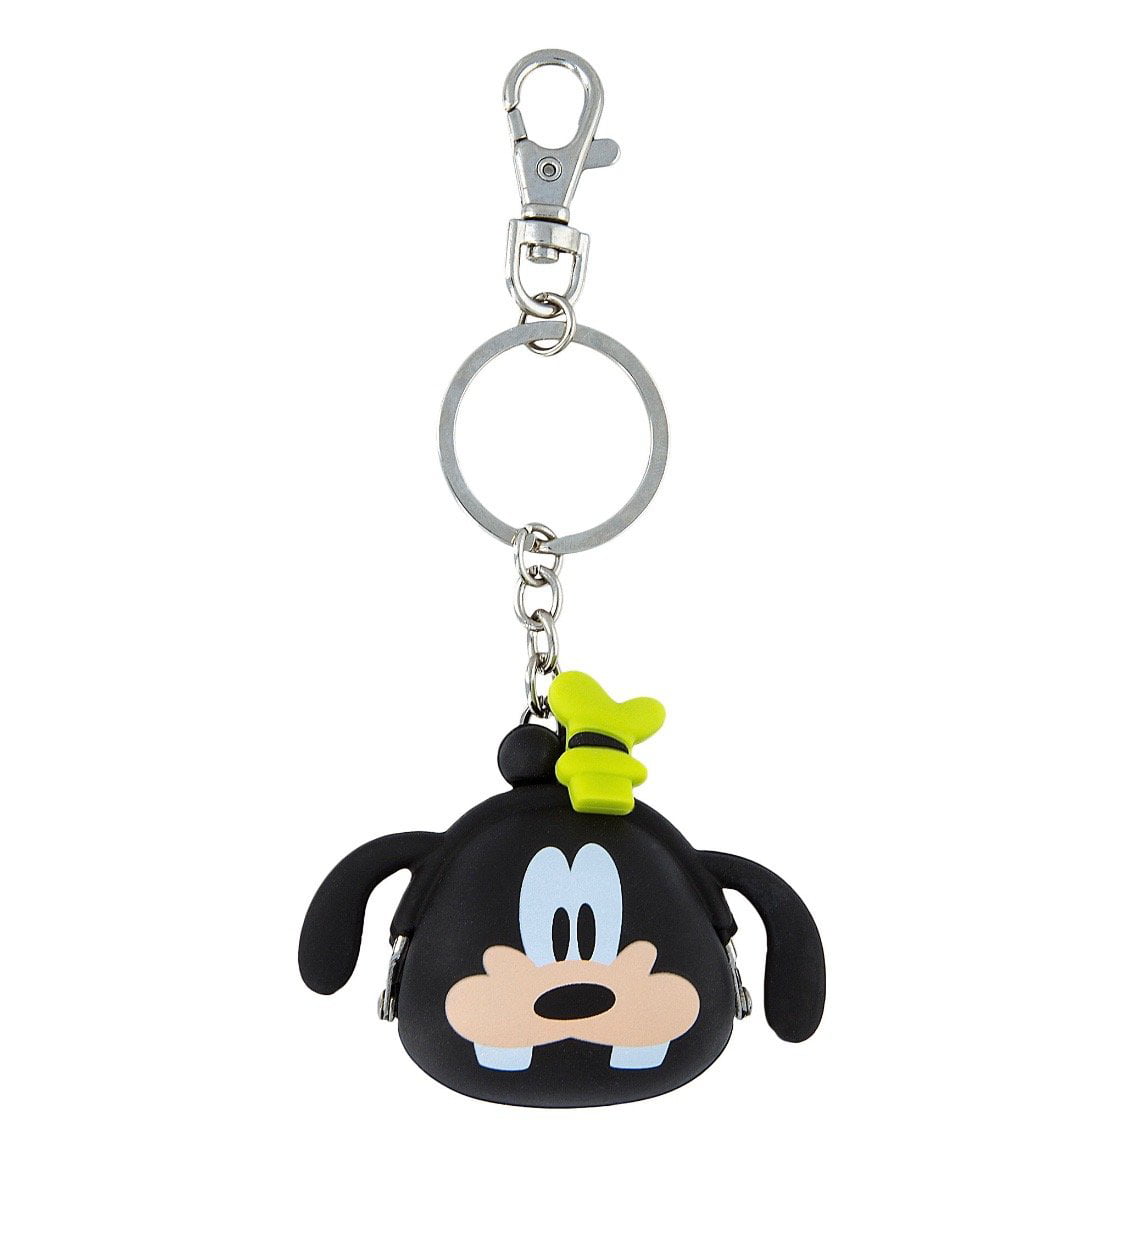 Disney Parks Goofy Coin Purse Silicone Keychain New with